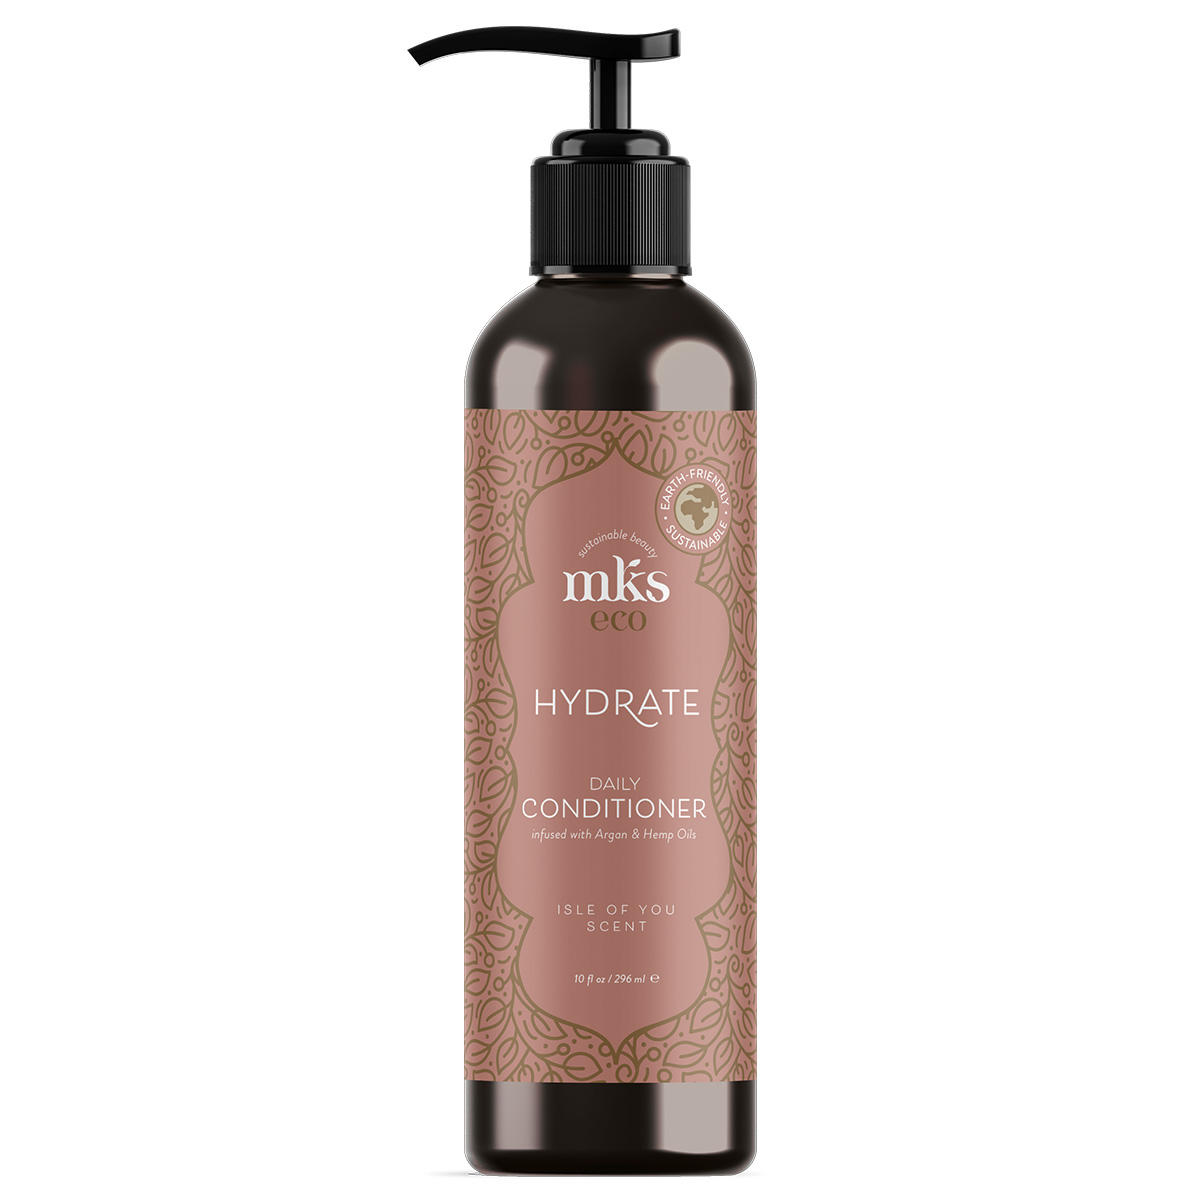 mks eco Hydrate Conditioner Isle of you Scent  296 ml - 1